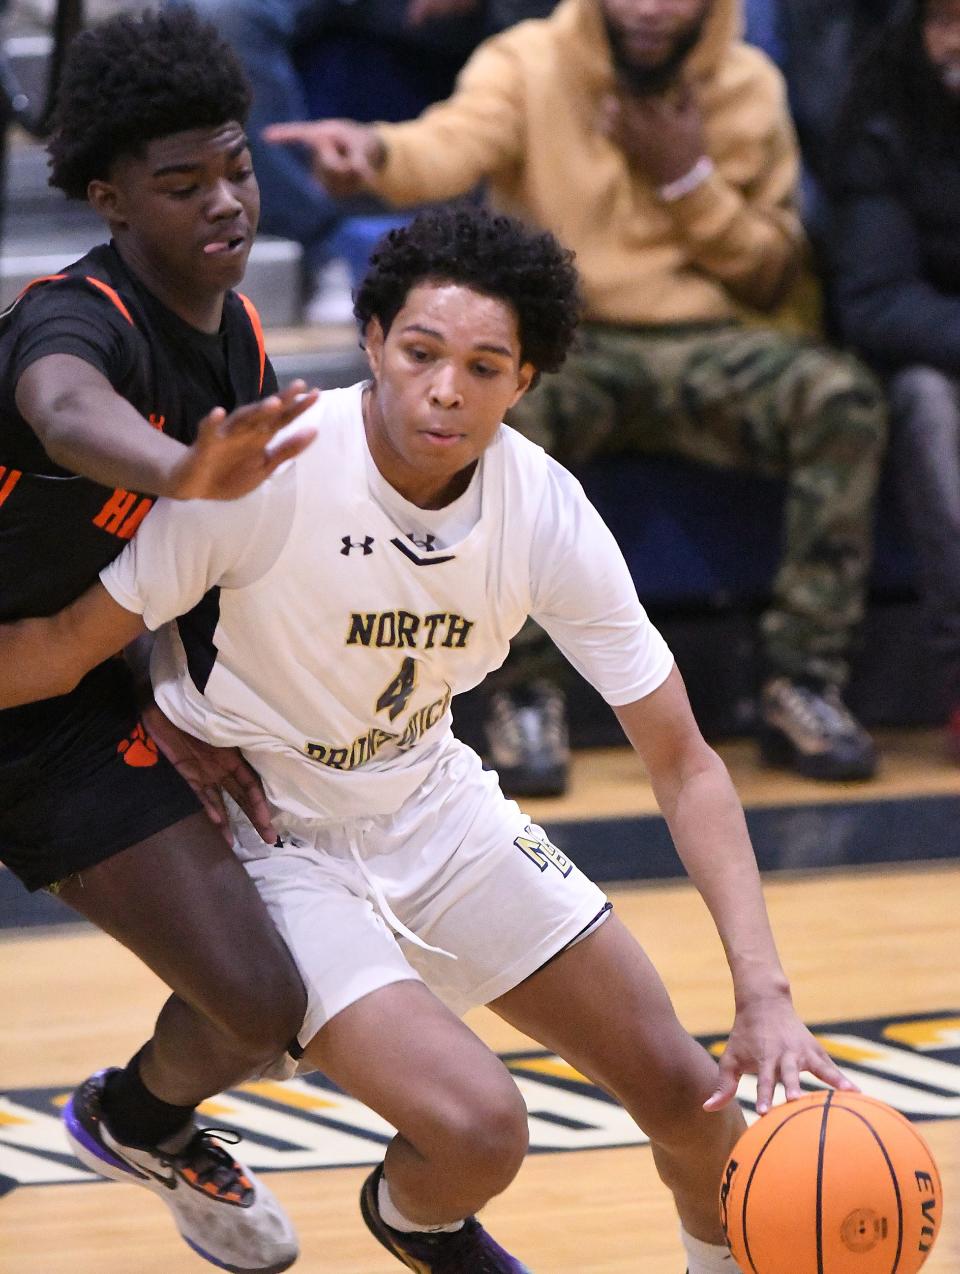 North Brunswick's Terry Hood leads the team in assists, blocks and rebounds.